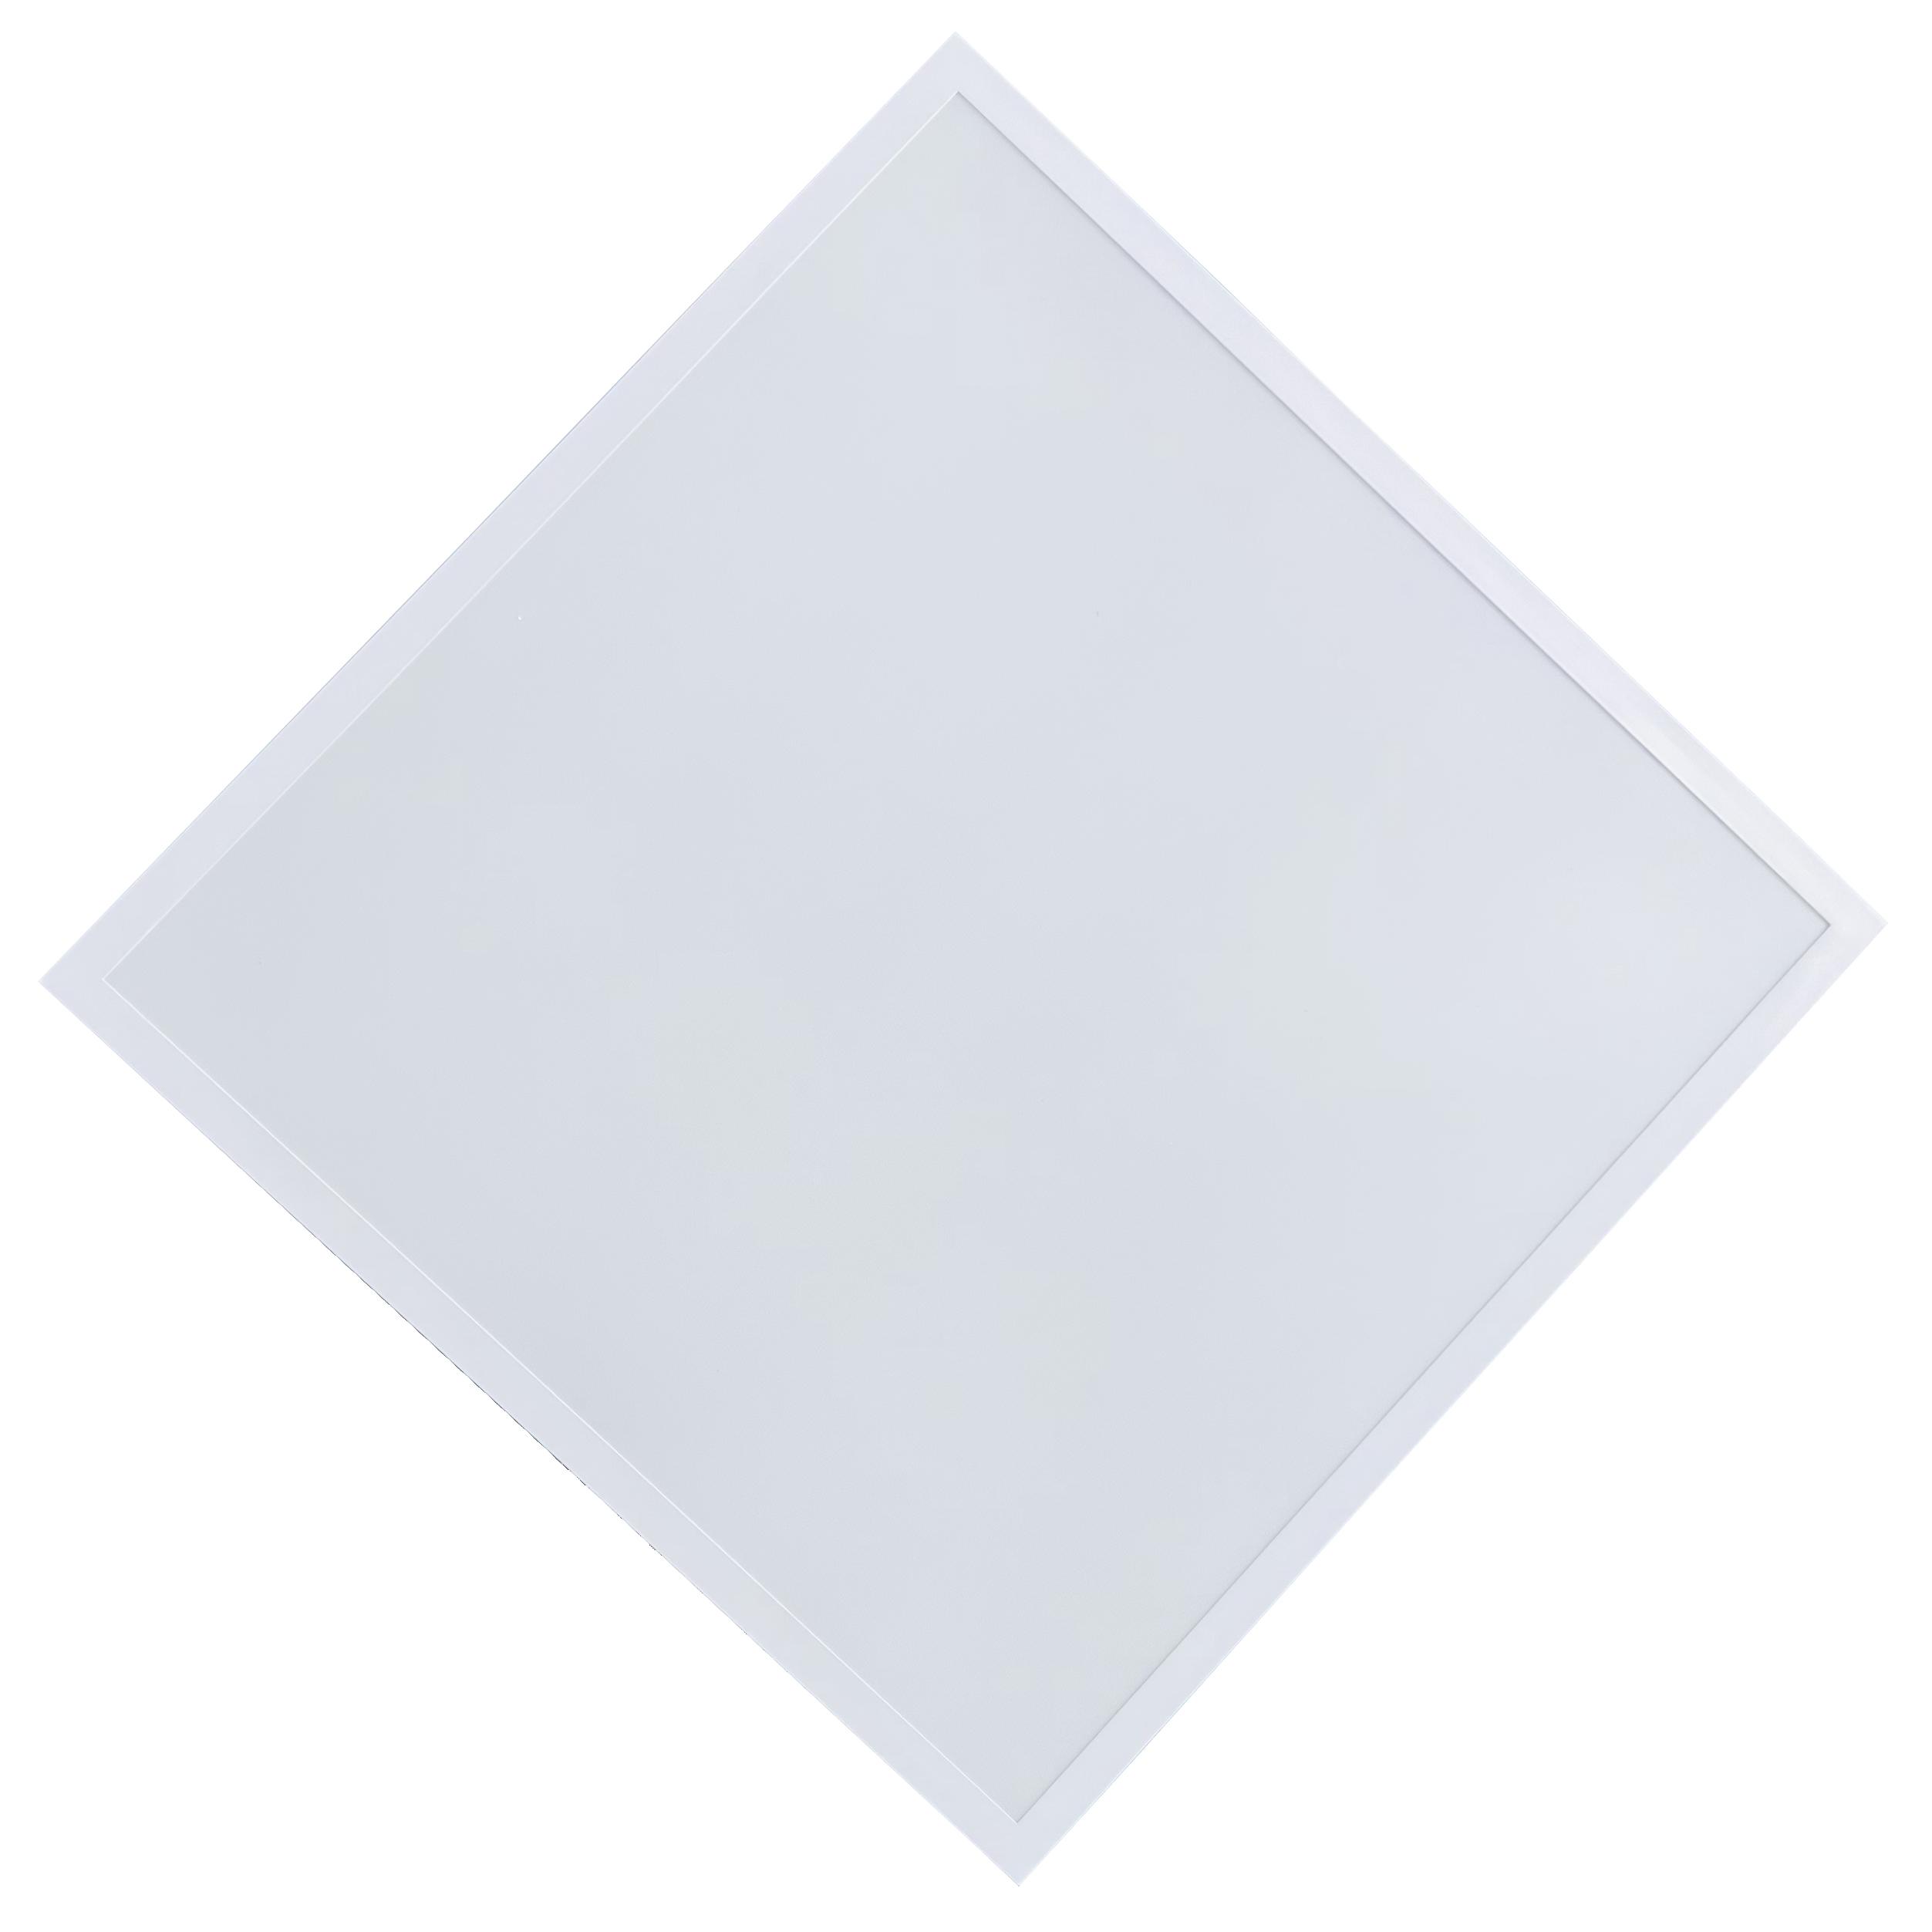 Led panel lamp with Prism Reverse Conical Diffuser Sheet